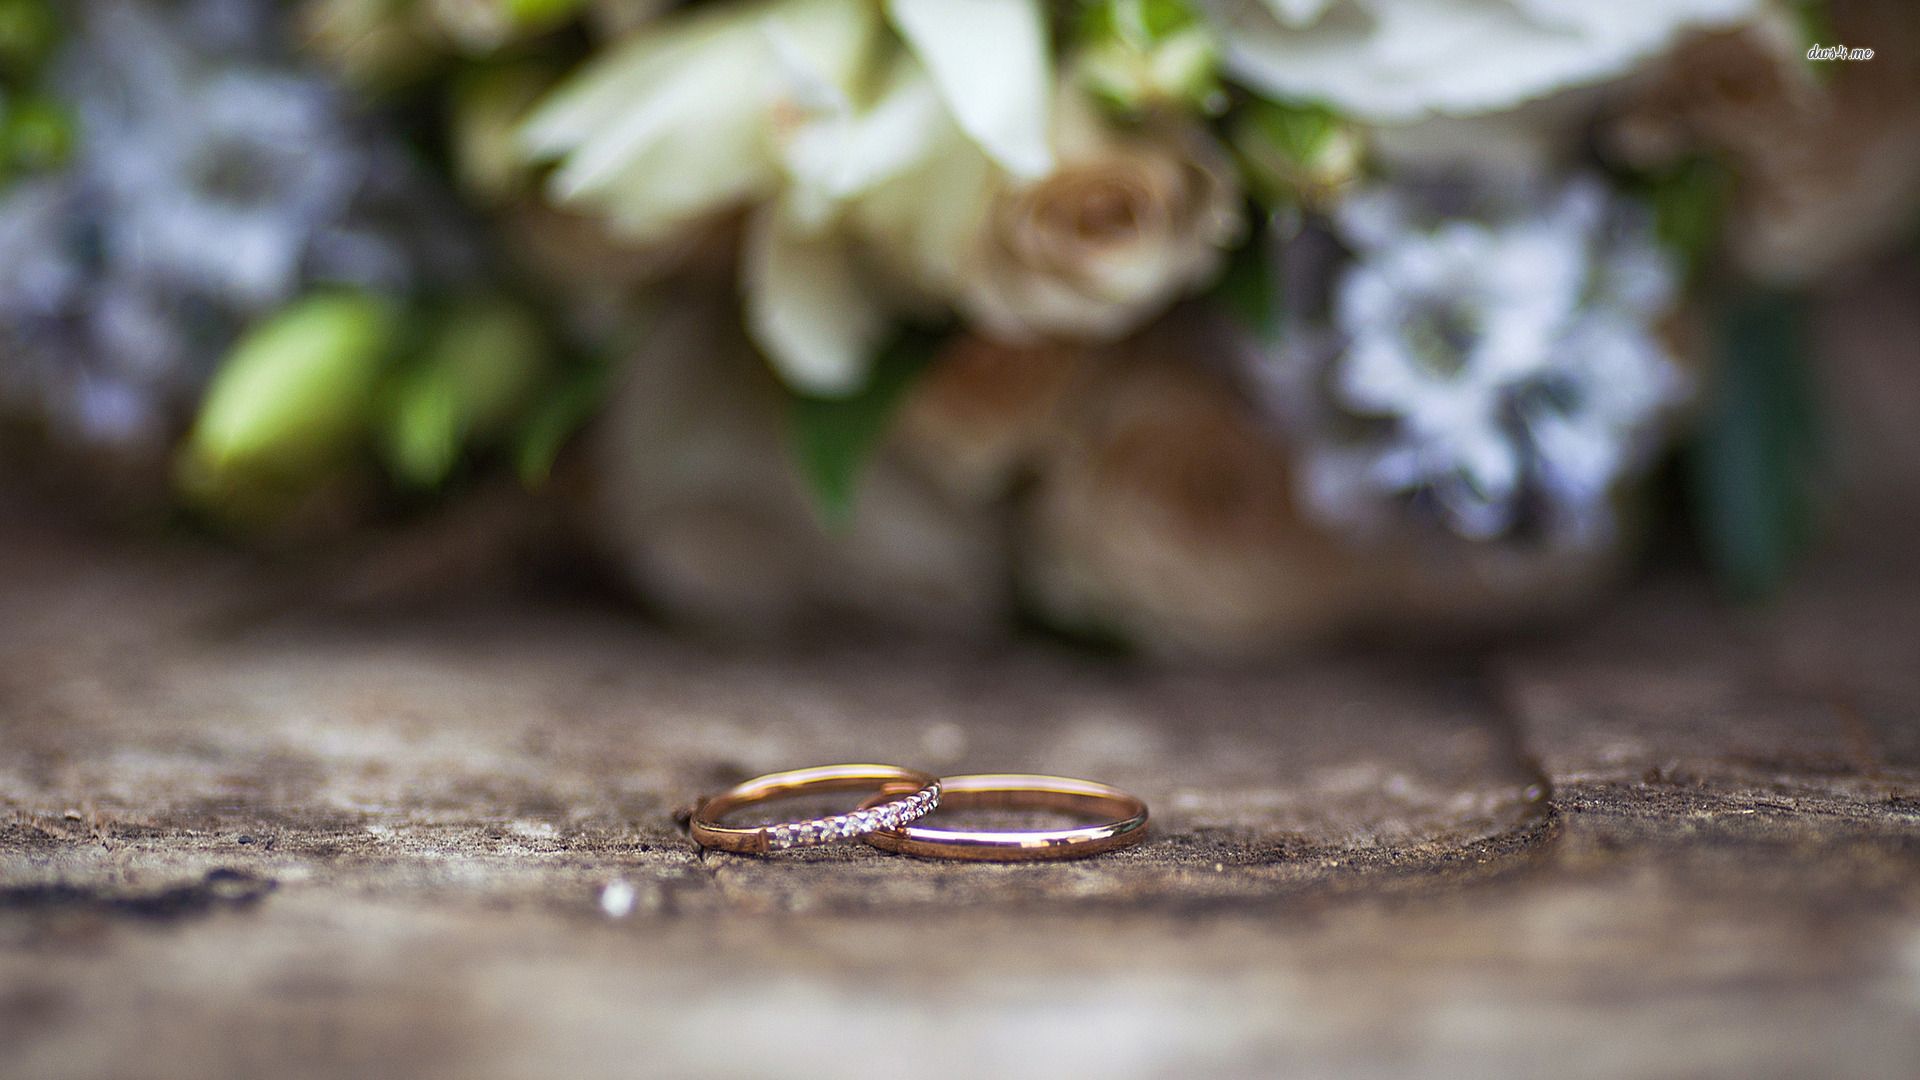 Wedding rings wallpaper - Photography wallpapers - #34593